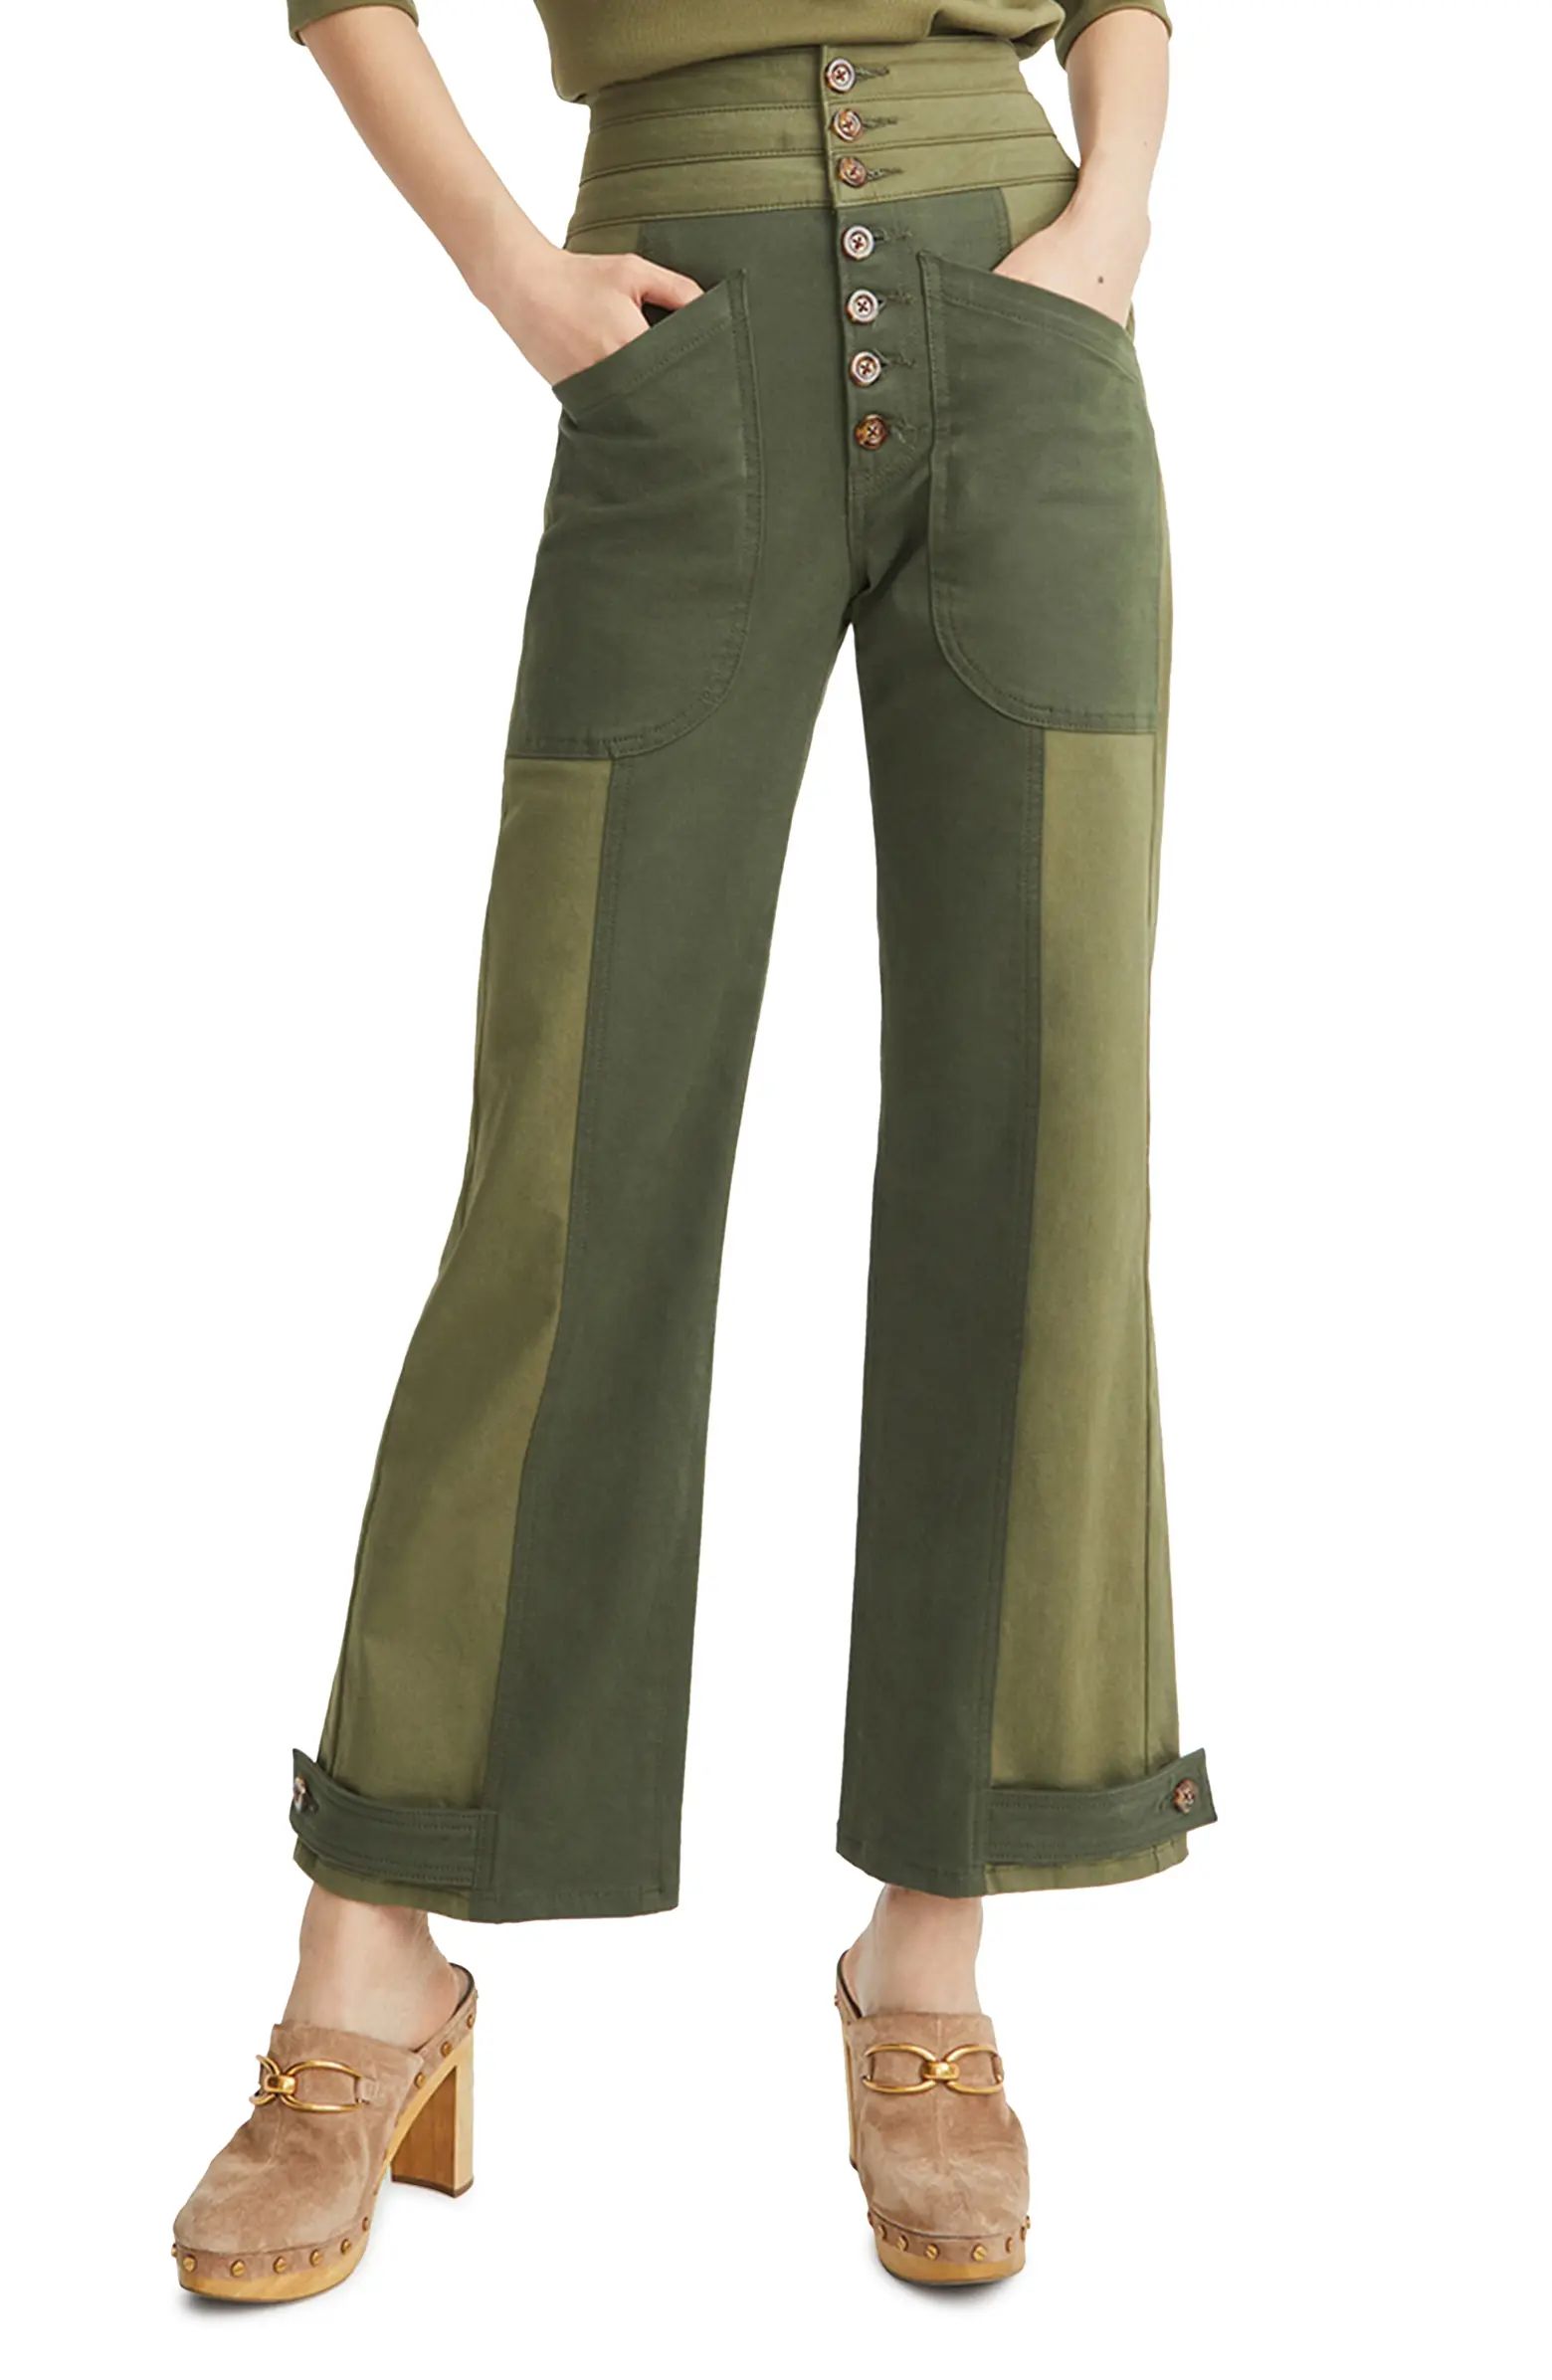 Marley Two-Tone Ankle Tab High Waist Pants | Nordstrom